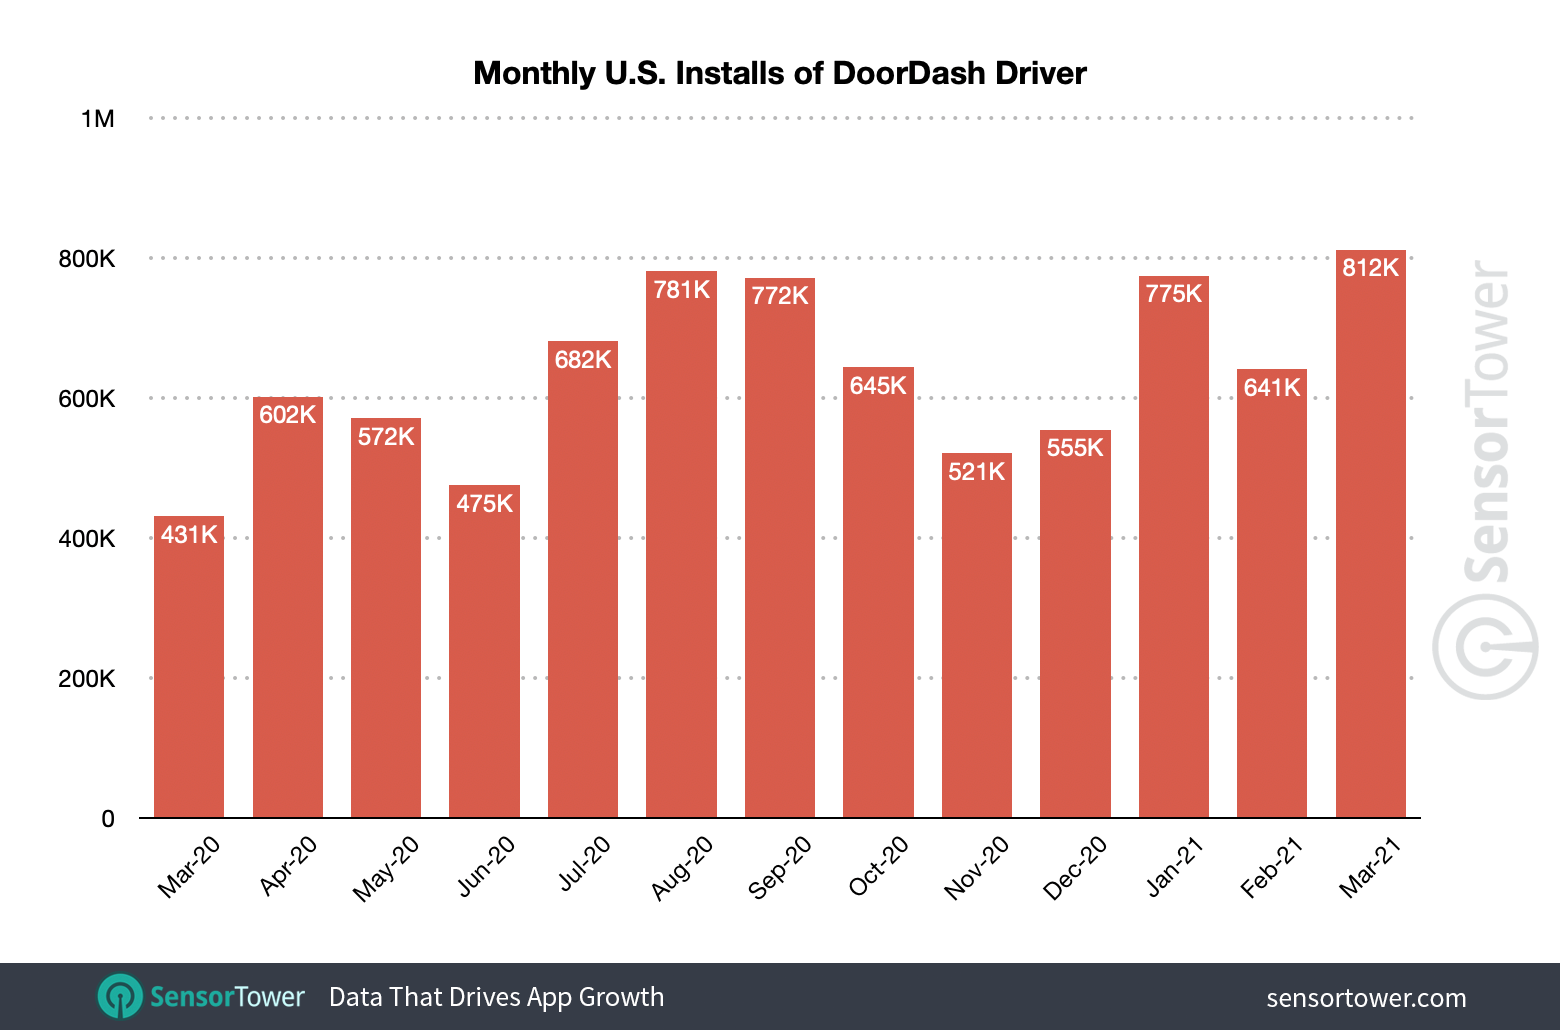 DoorDash Driver had its best-ever month of installs in March 2021.